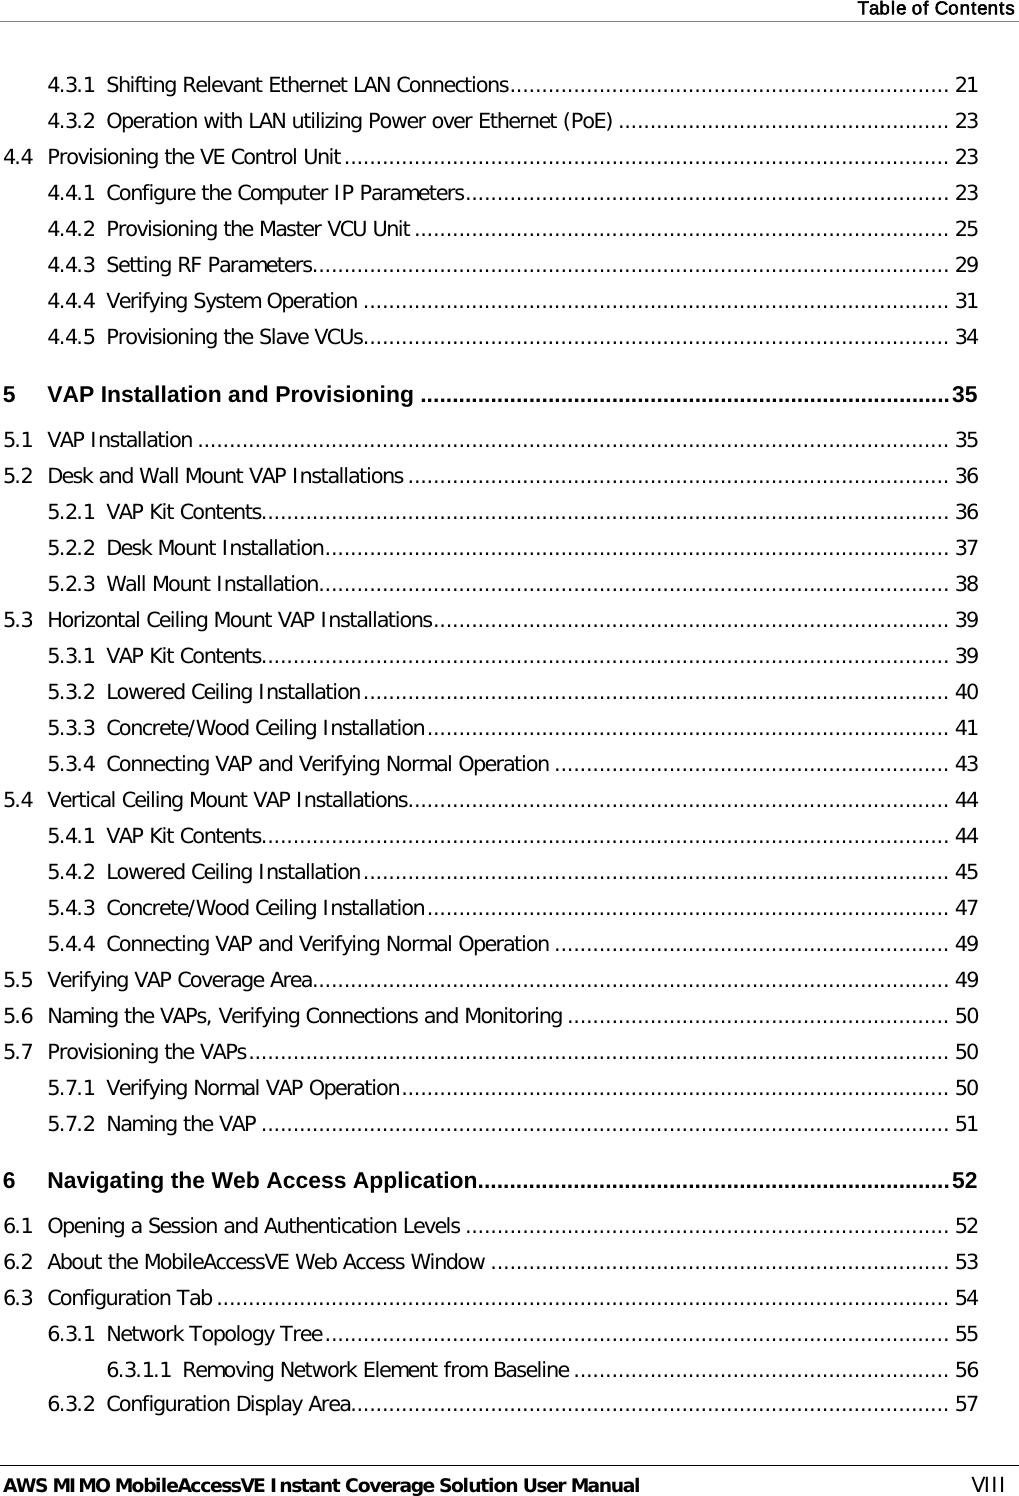 Table of Contents  AWS MIMO MobileAccessVE Instant Coverage Solution User Manual  VIII 4.3.1 Shifting Relevant Ethernet LAN Connections ..................................................................... 21 4.3.2 Operation with LAN utilizing Power over Ethernet (PoE) .................................................... 23 4.4 Provisioning the VE Control Unit ............................................................................................... 23 4.4.1 Configure the Computer IP Parameters ............................................................................ 23 4.4.2 Provisioning the Master VCU Unit .................................................................................... 25 4.4.3 Setting RF Parameters .................................................................................................... 29 4.4.4 Verifying System Operation ............................................................................................ 31 4.4.5 Provisioning the Slave VCUs ............................................................................................ 34 5 VAP Installation and Provisioning ................................................................................... 35 5.1 VAP Installation ...................................................................................................................... 35 5.2 Desk and Wall Mount VAP Installations ..................................................................................... 36 5.2.1 VAP Kit Contents............................................................................................................ 36 5.2.2 Desk Mount Installation .................................................................................................. 37 5.2.3 Wall Mount Installation ................................................................................................... 38 5.3 Horizontal Ceiling Mount VAP Installations ................................................................................. 39 5.3.1 VAP Kit Contents............................................................................................................ 39 5.3.2 Lowered Ceiling Installation ............................................................................................ 40 5.3.3 Concrete/Wood Ceiling Installation .................................................................................. 41 5.3.4 Connecting VAP and Verifying Normal Operation .............................................................. 43 5.4 Vertical Ceiling Mount VAP Installations ..................................................................................... 44 5.4.1 VAP Kit Contents............................................................................................................ 44 5.4.2 Lowered Ceiling Installation ............................................................................................ 45 5.4.3 Concrete/Wood Ceiling Installation .................................................................................. 47 5.4.4 Connecting VAP and Verifying Normal Operation .............................................................. 49 5.5 Verifying VAP Coverage Area .................................................................................................... 49 5.6 Naming the VAPs, Verifying Connections and Monitoring ............................................................ 50 5.7 Provisioning the VAPs .............................................................................................................. 50 5.7.1 Verifying Normal VAP Operation ...................................................................................... 50 5.7.2 Naming the VAP ............................................................................................................ 51 6 Navigating the Web Access Application.......................................................................... 52 6.1 Opening a Session and Authentication Levels ............................................................................ 52 6.2 About the MobileAccessVE Web Access Window ........................................................................ 53 6.3 Configuration Tab ................................................................................................................... 54 6.3.1 Network Topology Tree .................................................................................................. 55 6.3.1.1 Removing Network Element from Baseline ........................................................... 56 6.3.2 Configuration Display Area .............................................................................................. 57 